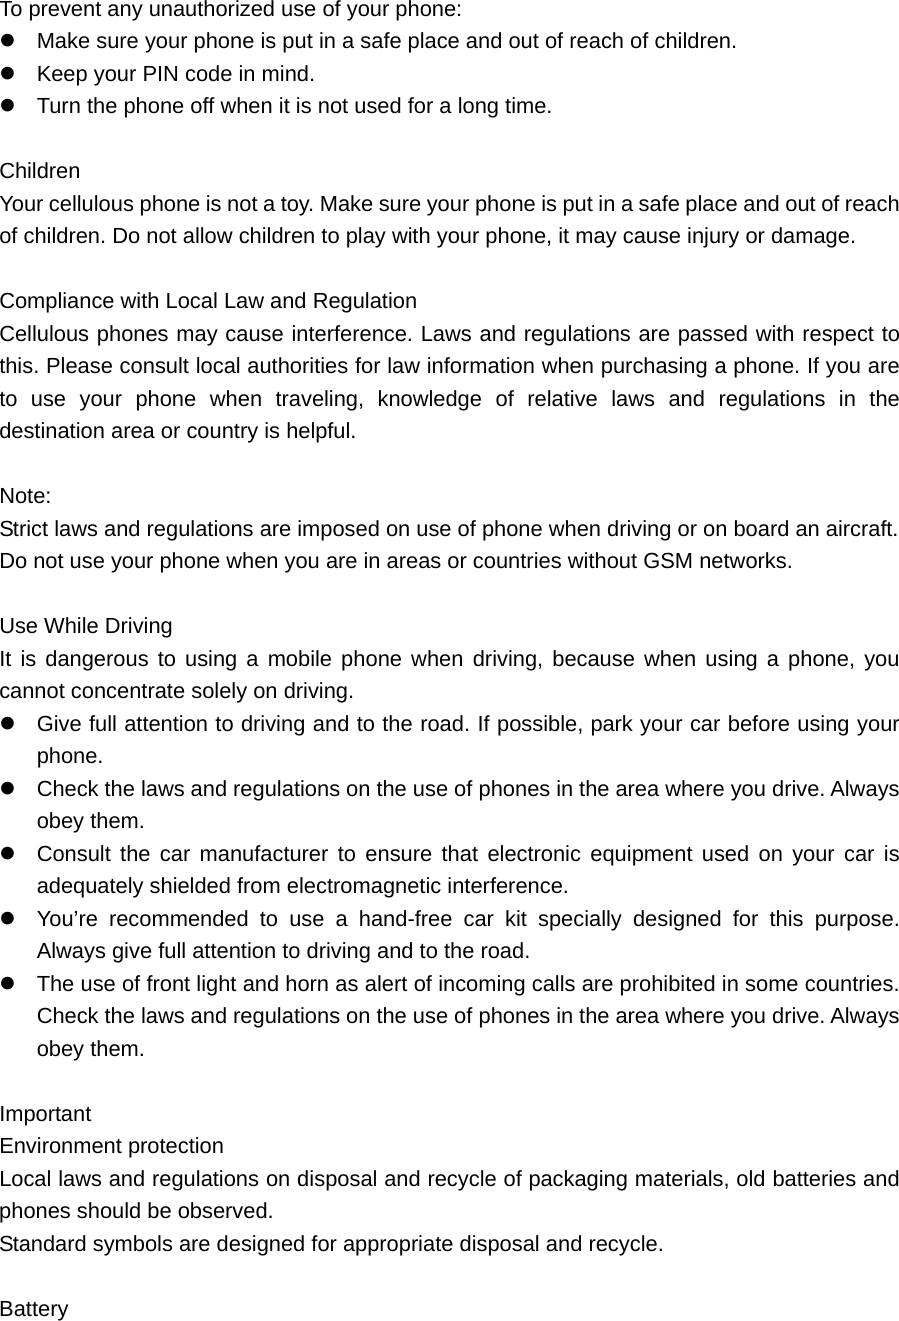 To prevent any unauthorized use of your phone:  Make sure your phone is put in a safe place and out of reach of children.    Keep your PIN code in mind.    Turn the phone off when it is not used for a long time.    Children Your cellulous phone is not a toy. Make sure your phone is put in a safe place and out of reach of children. Do not allow children to play with your phone, it may cause injury or damage.    Compliance with Local Law and Regulation Cellulous phones may cause interference. Laws and regulations are passed with respect to this. Please consult local authorities for law information when purchasing a phone. If you are to use your phone when traveling, knowledge of relative laws and regulations in the destination area or country is helpful.    Note:  Strict laws and regulations are imposed on use of phone when driving or on board an aircraft.   Do not use your phone when you are in areas or countries without GSM networks.    Use While Driving It is dangerous to using a mobile phone when driving, because when using a phone, you cannot concentrate solely on driving.    Give full attention to driving and to the road. If possible, park your car before using your phone.   Check the laws and regulations on the use of phones in the area where you drive. Always obey them.    Consult the car manufacturer to ensure that electronic equipment used on your car is adequately shielded from electromagnetic interference.  You’re recommended to use a hand-free car kit specially designed for this purpose. Always give full attention to driving and to the road.    The use of front light and horn as alert of incoming calls are prohibited in some countries. Check the laws and regulations on the use of phones in the area where you drive. Always obey them.    Important  Environment protection Local laws and regulations on disposal and recycle of packaging materials, old batteries and phones should be observed.   Standard symbols are designed for appropriate disposal and recycle.    Battery  